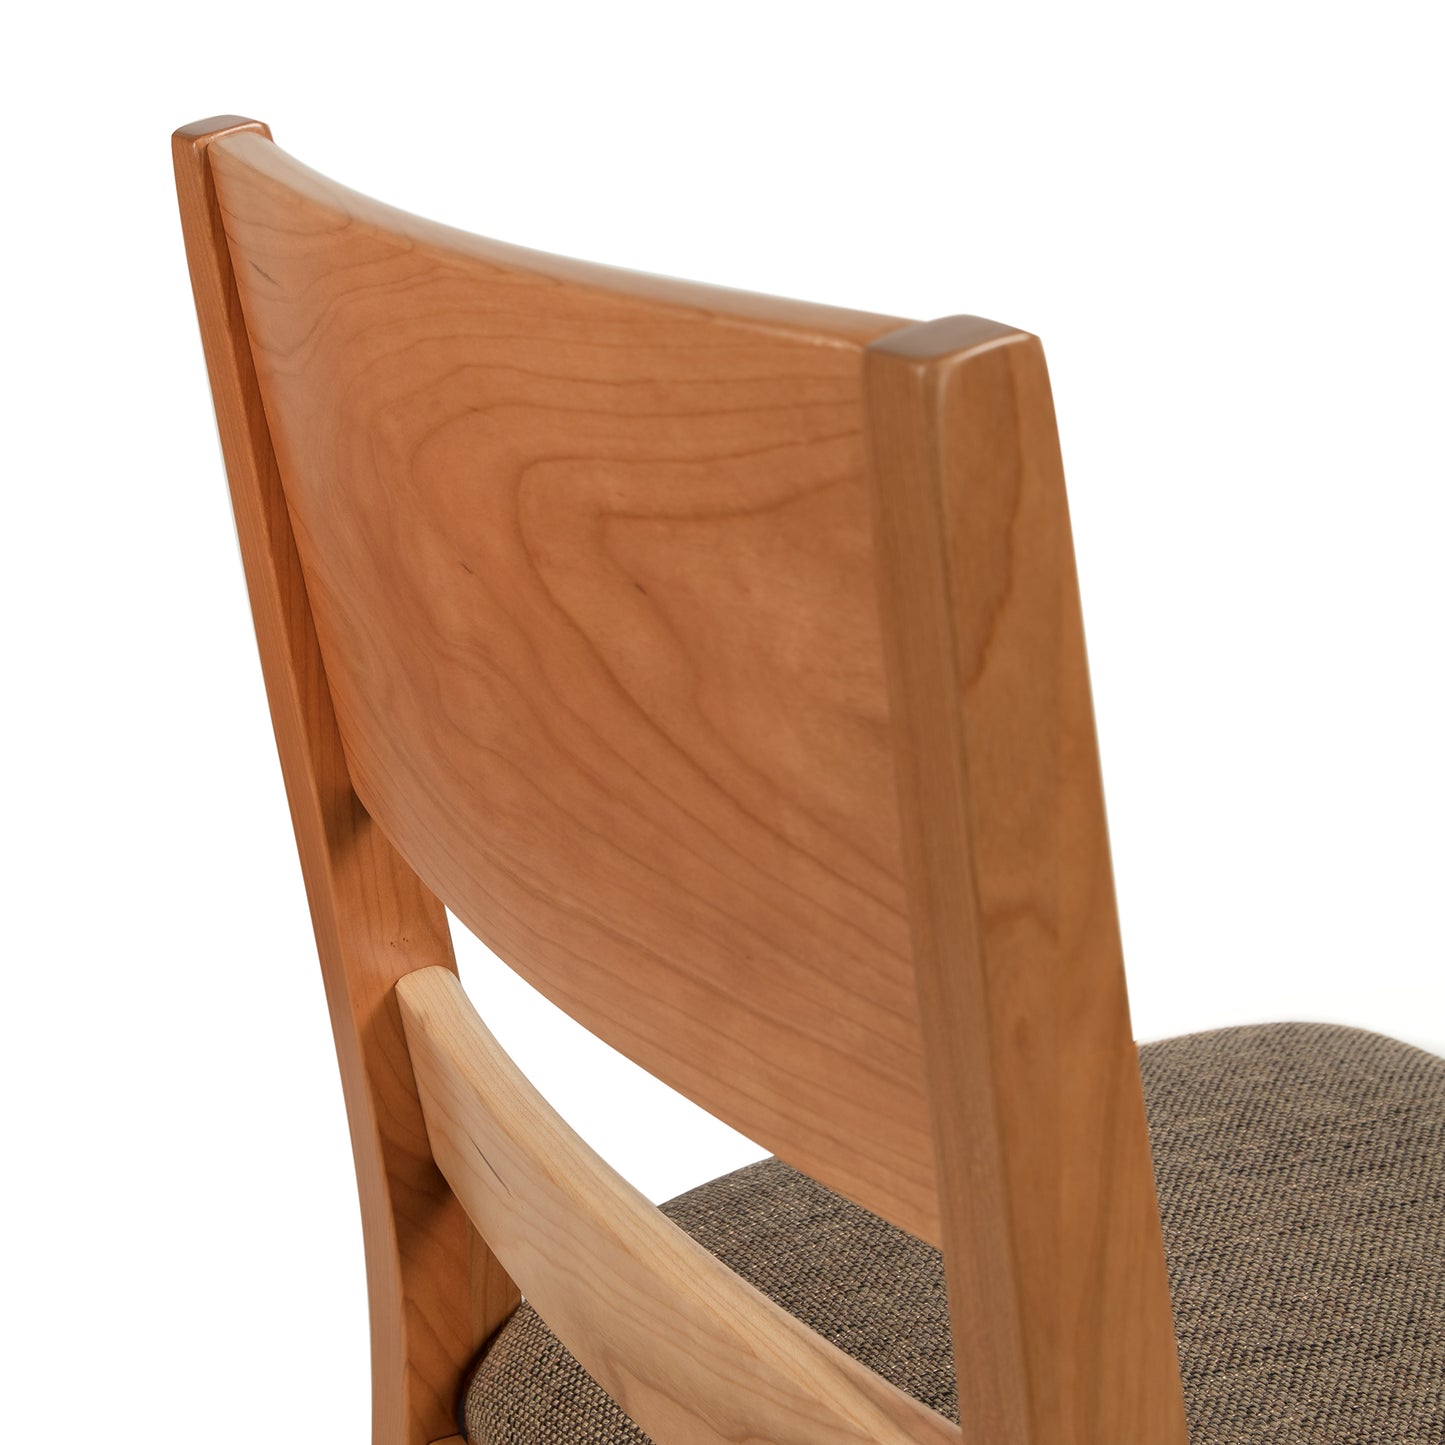 The back of a wooden chair with a tan seat.